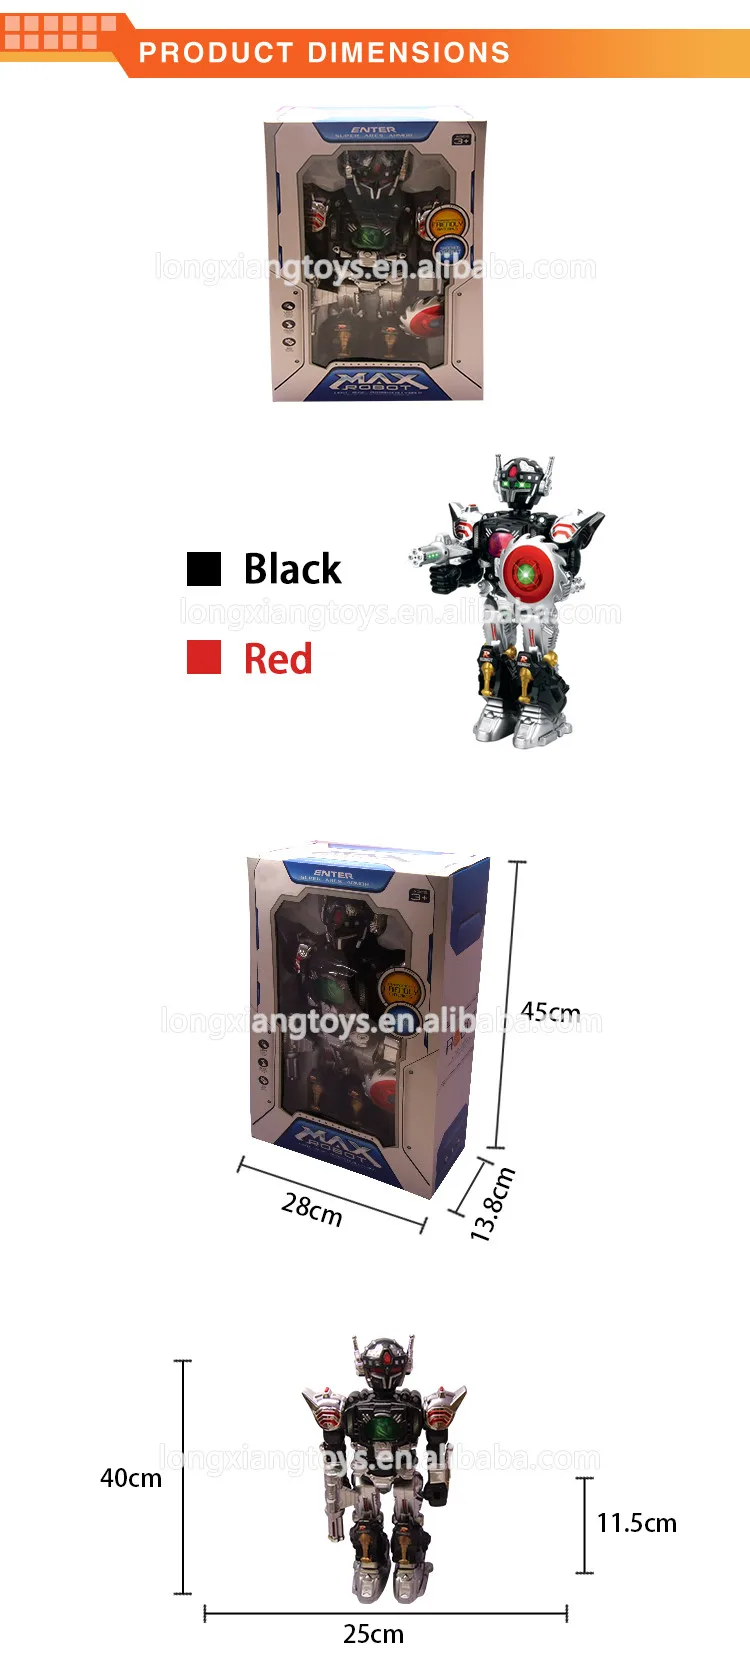 High quality 360 degree spin plastic battery operated toy robot with light and music